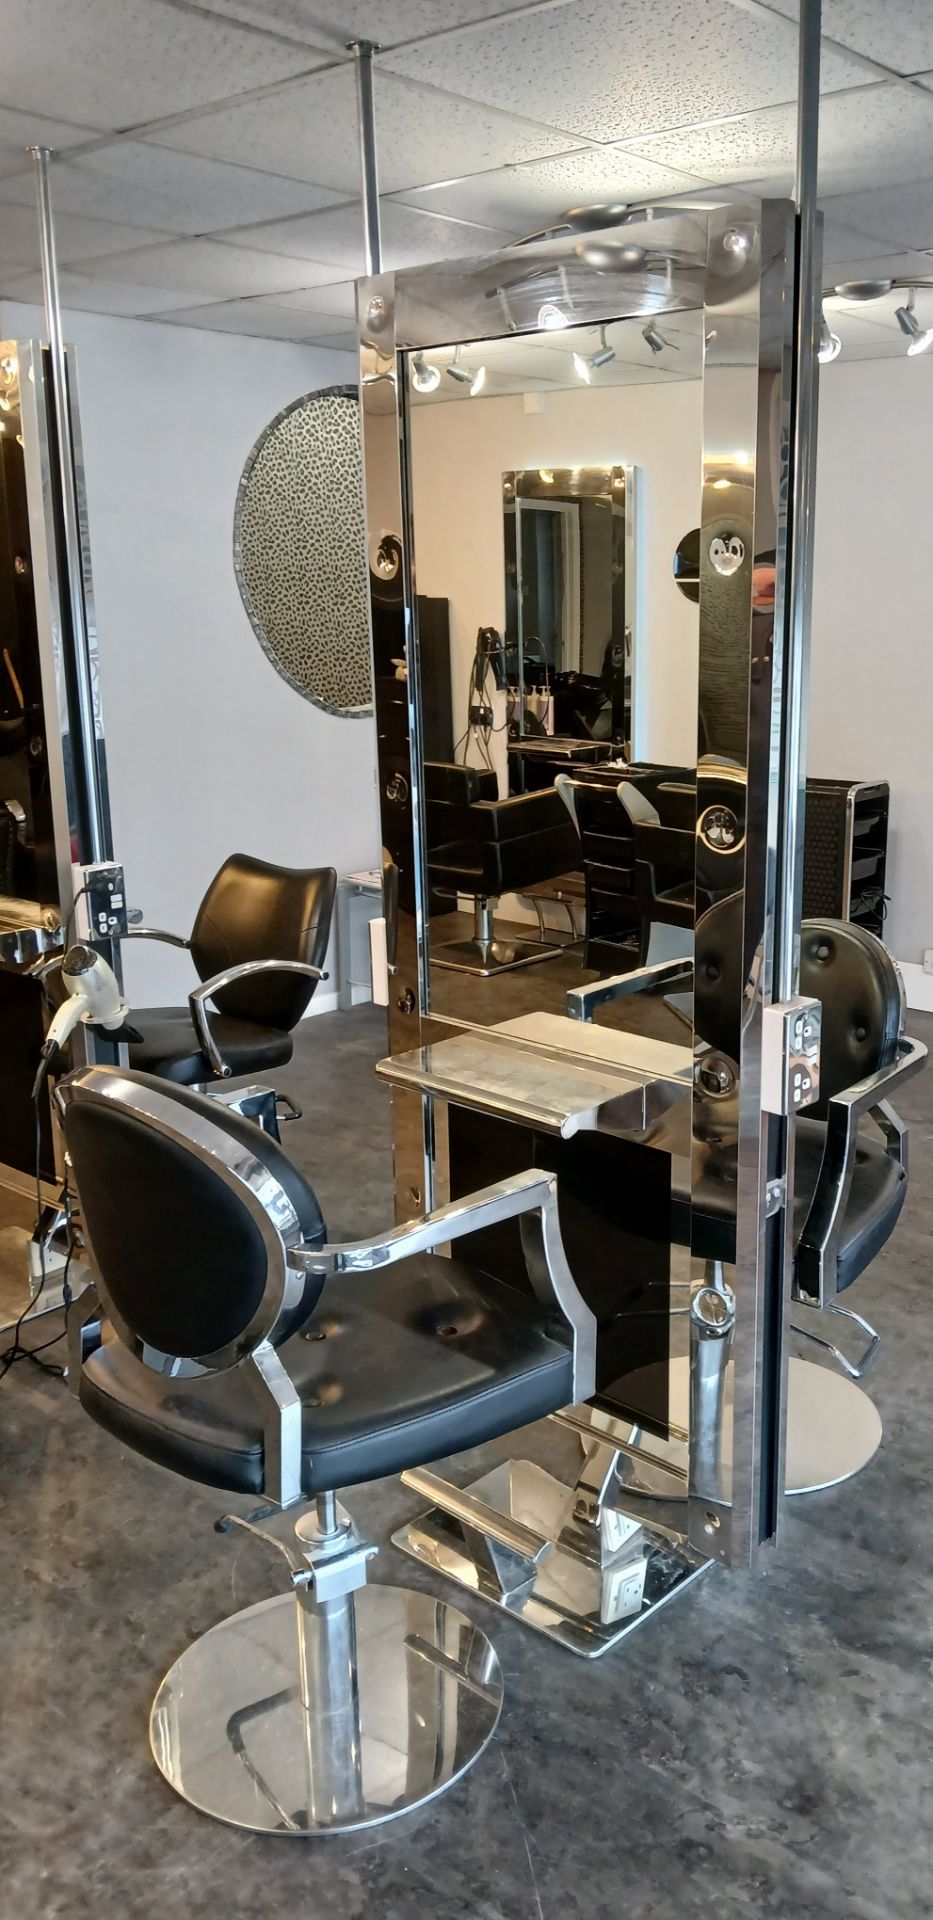 Double Sided Salon Station, comprising mirror with integrated shelf, footrest, with 2 x salon swivel